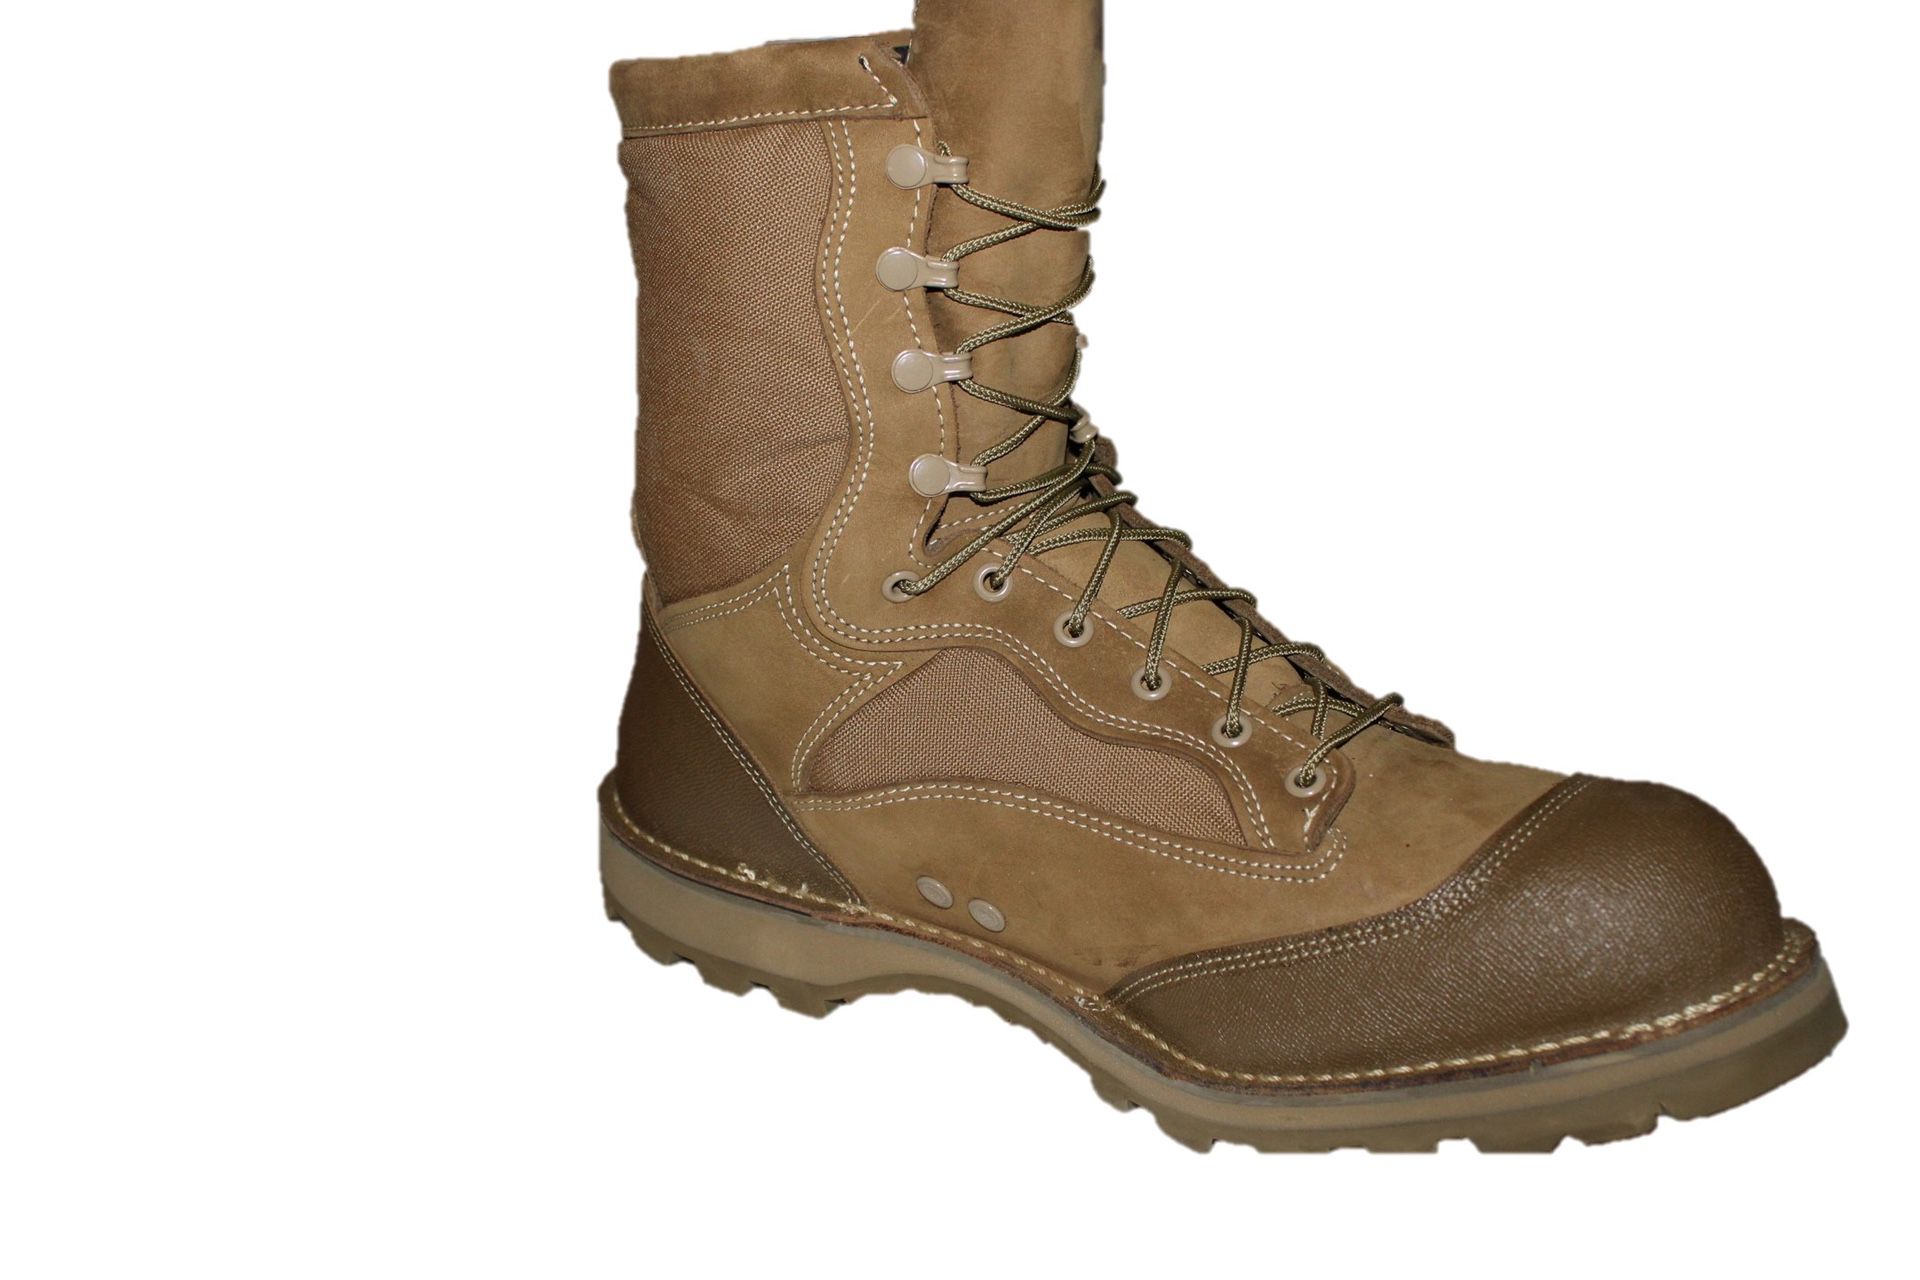 New In Box - Bates Men's Military Boot (Size 14.5 R)